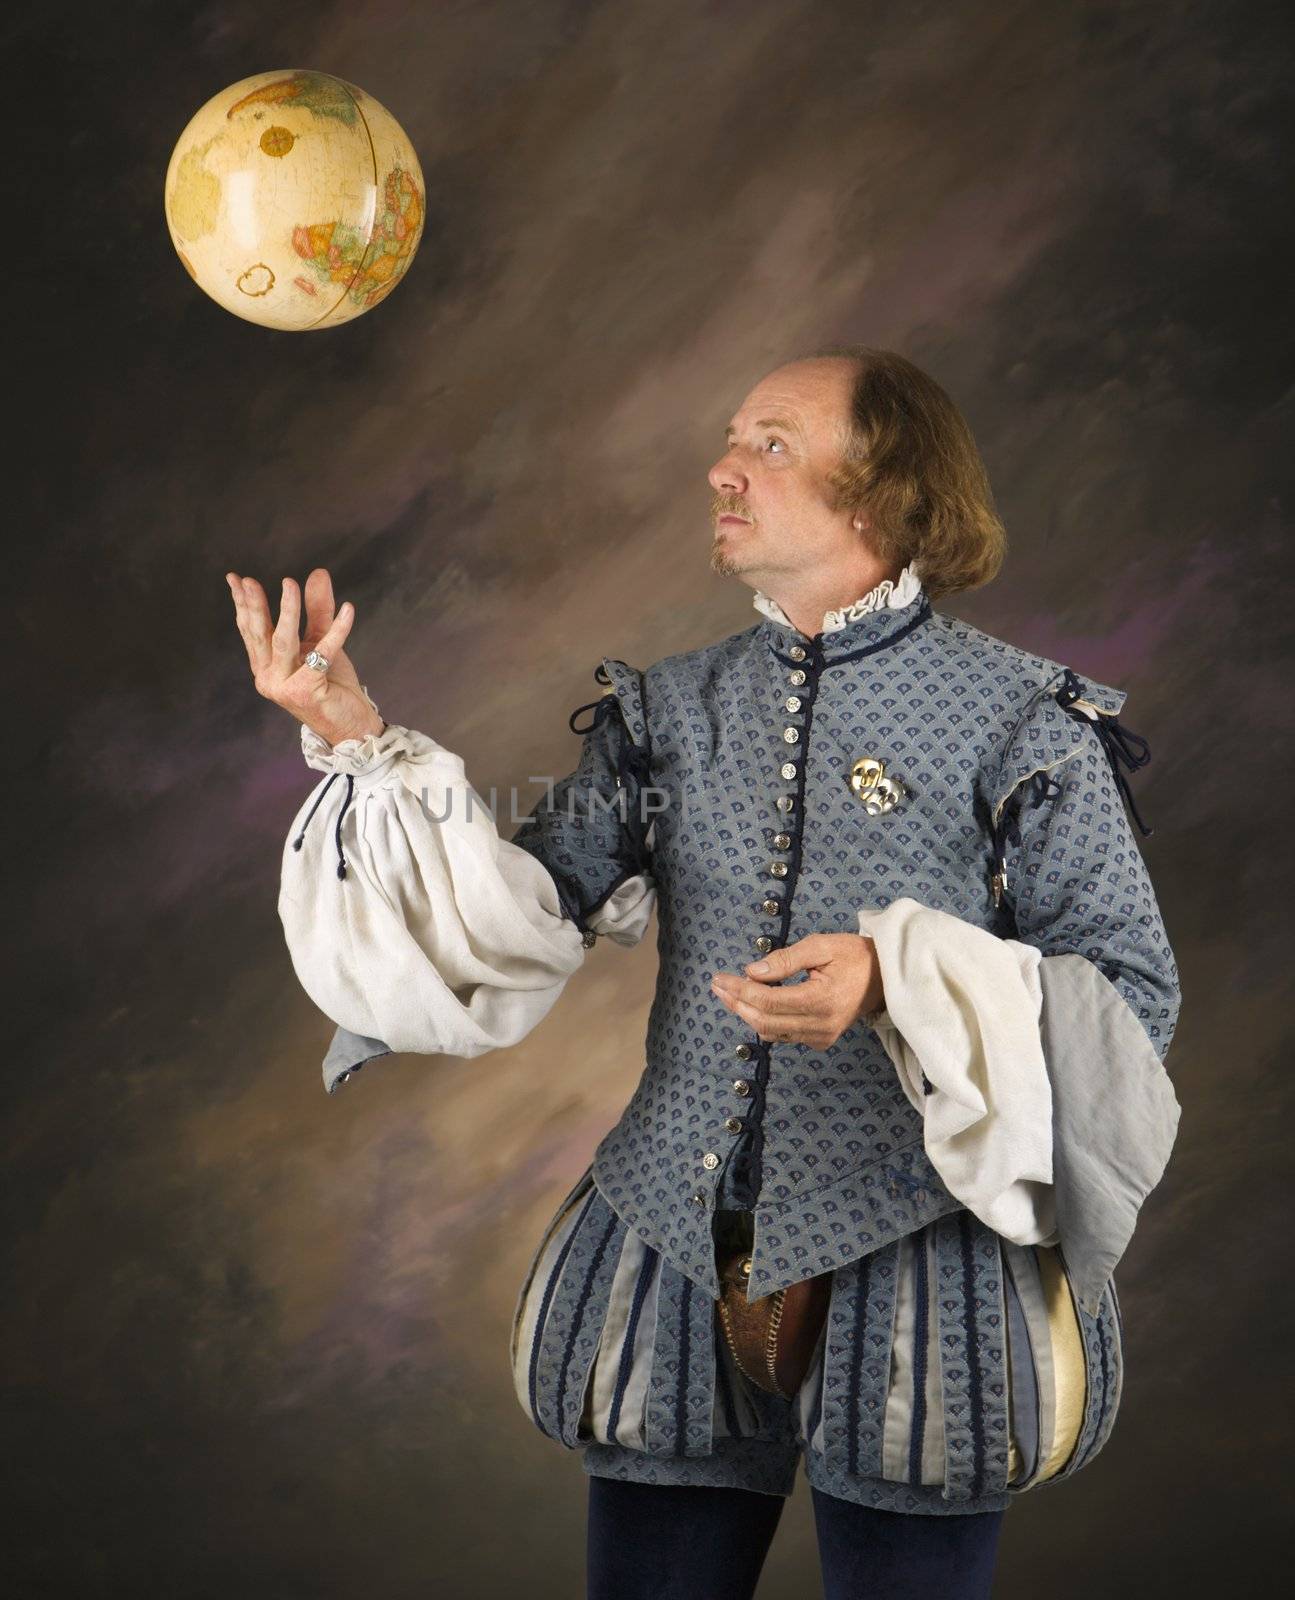 William Shakespeare in period clothing tossing globe into air.